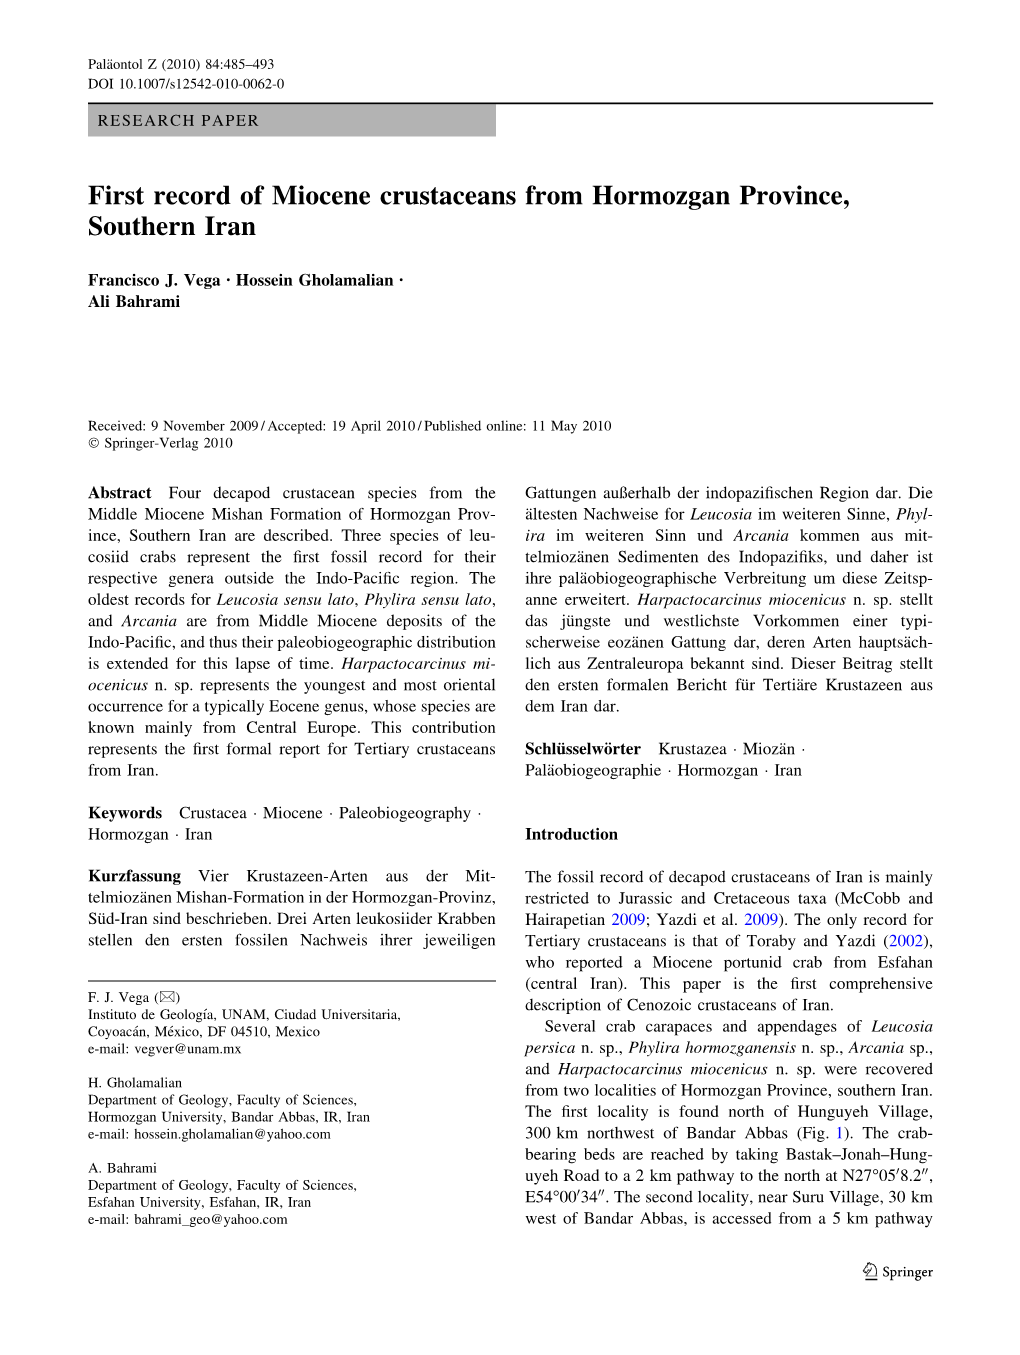 First Record of Miocene Crustaceans from Hormozgan Province, Southern Iran